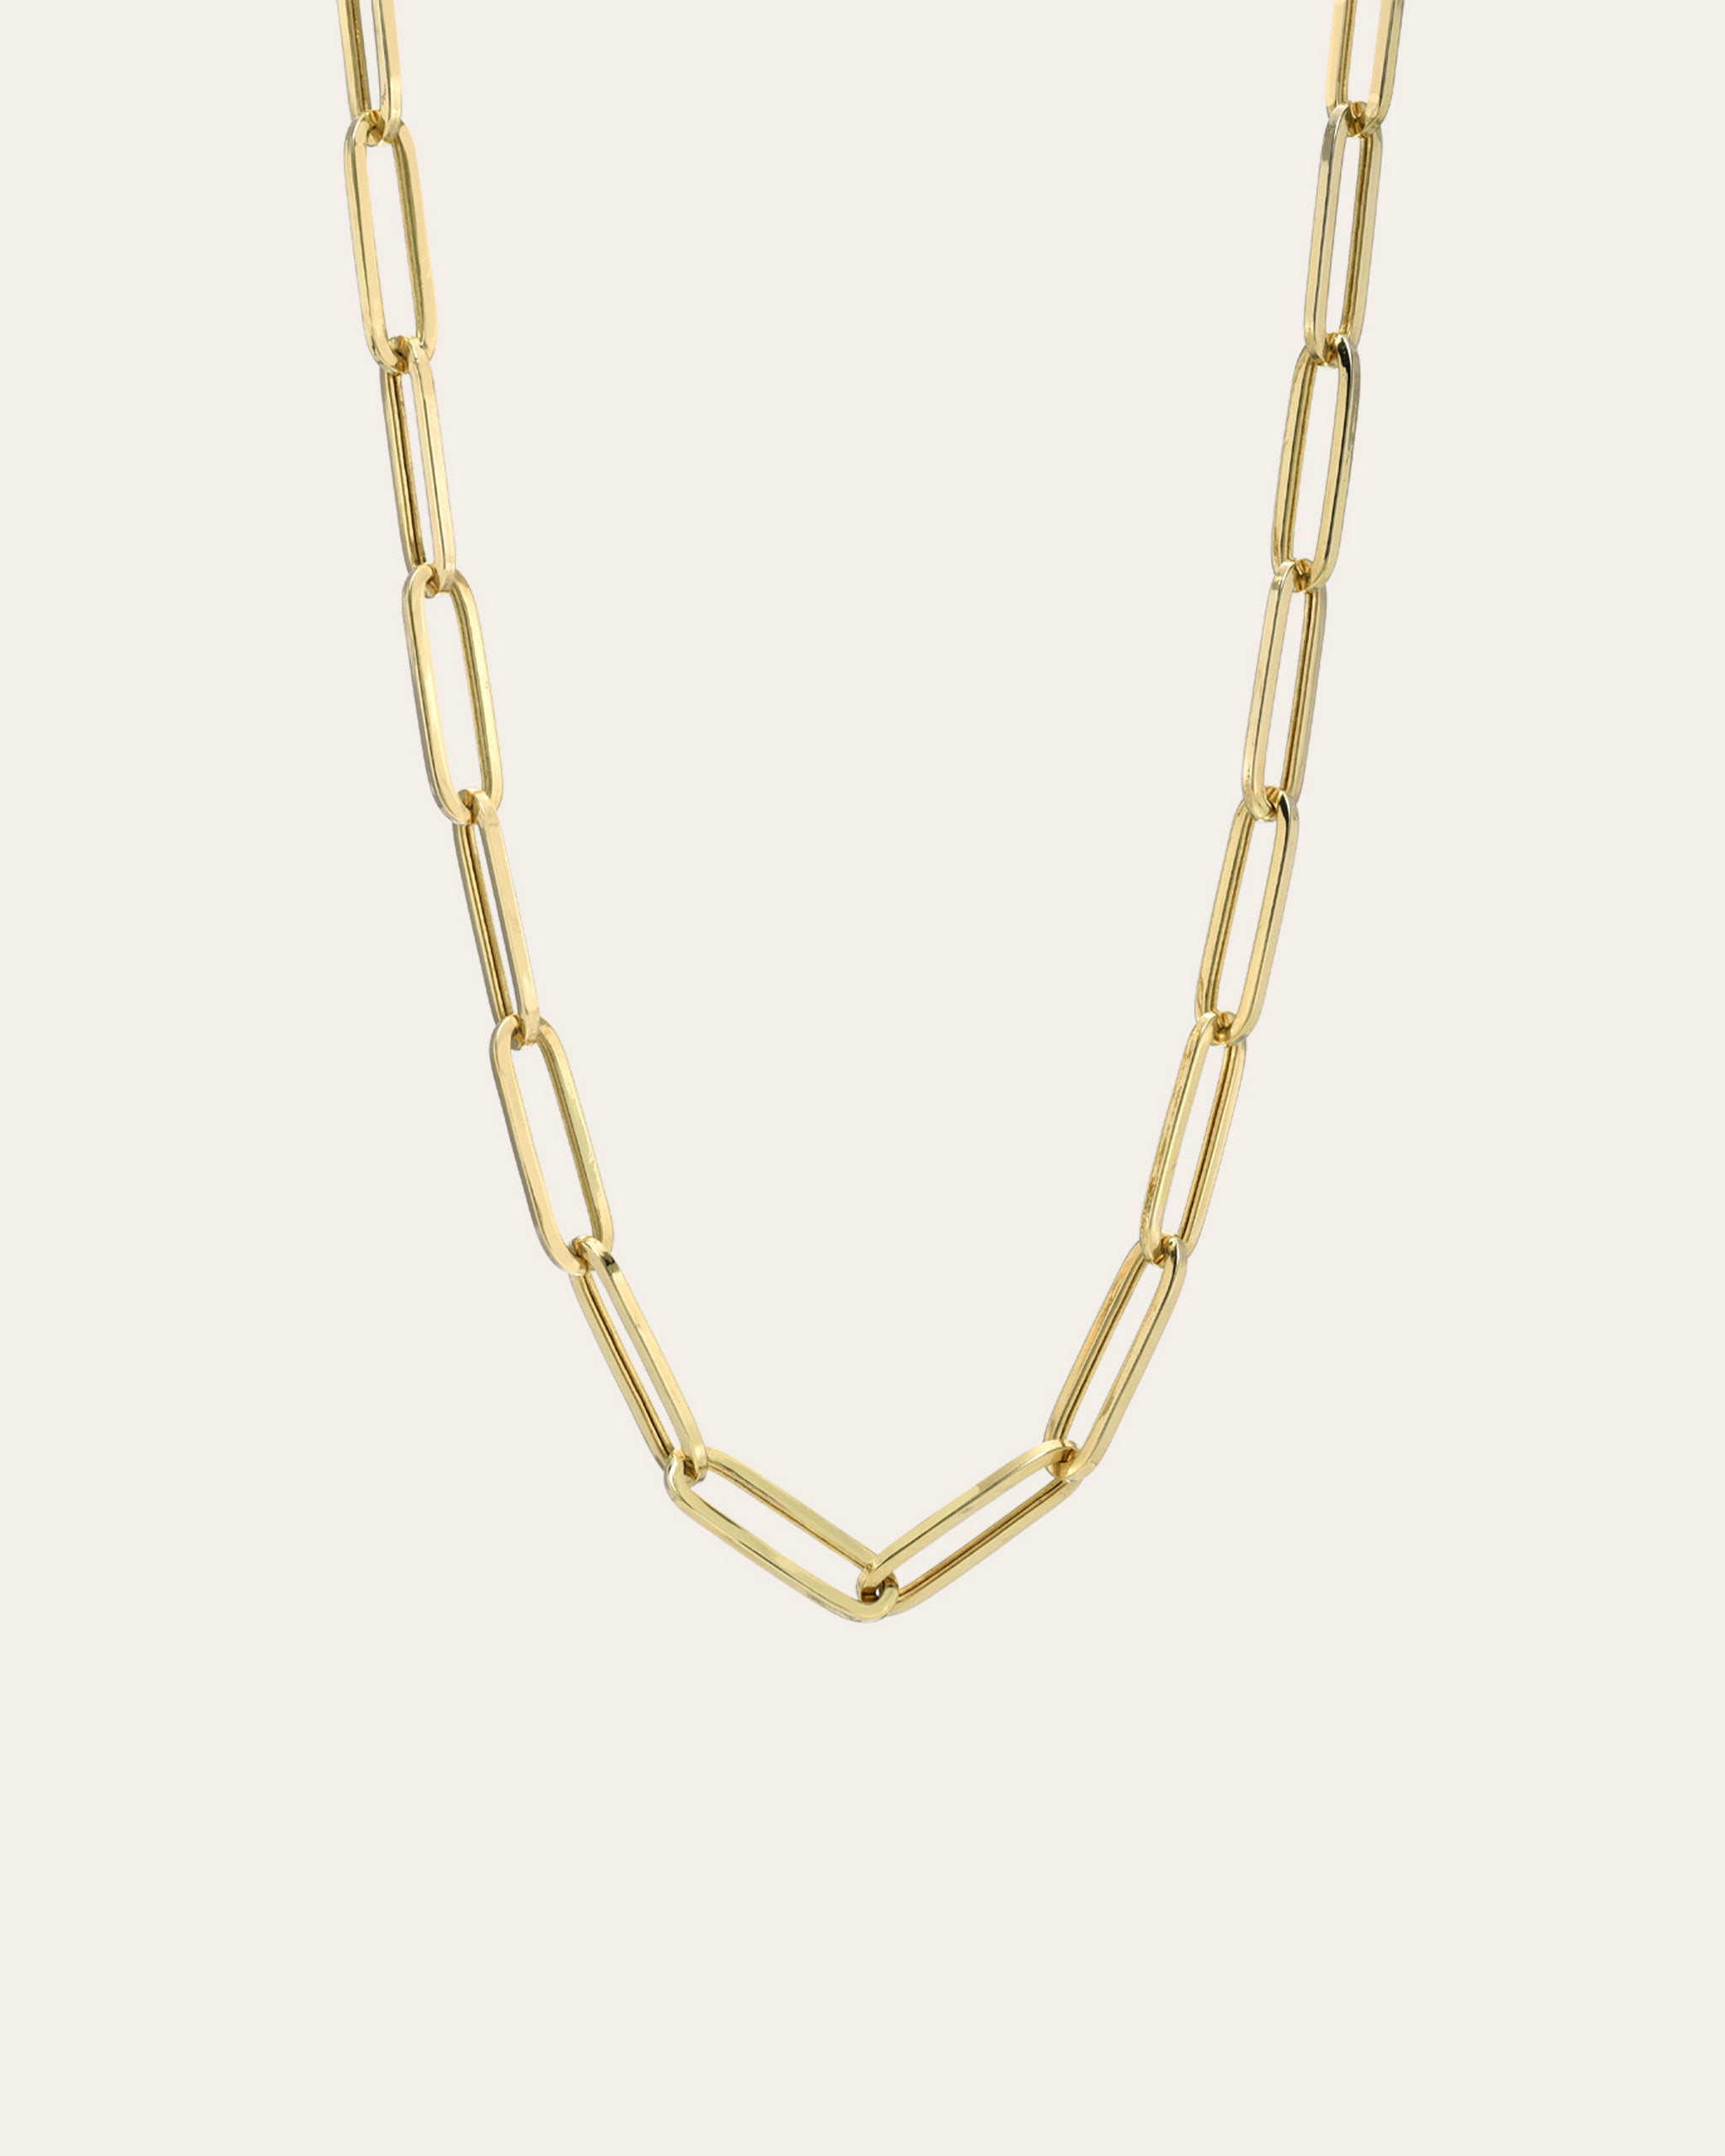 Aurate New York Large Paperclip Chain Necklace, 14K Lightweight Yellow Gold, Size 18in